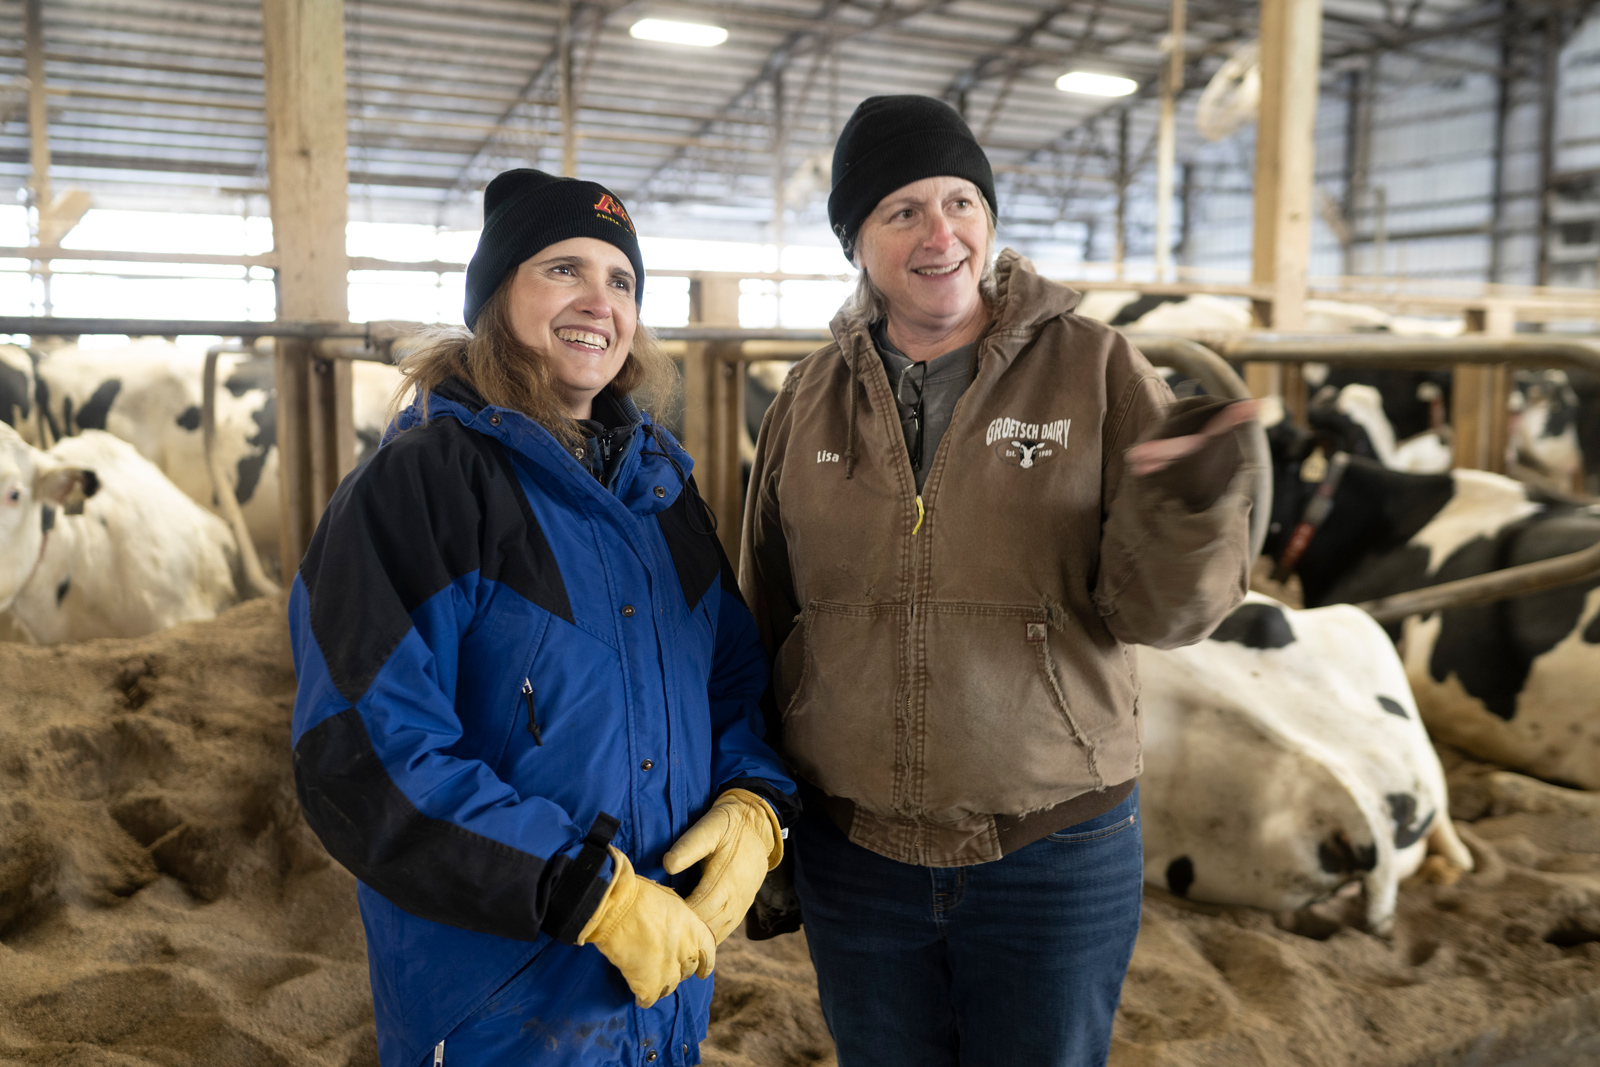 Women in front of cows inside large barn